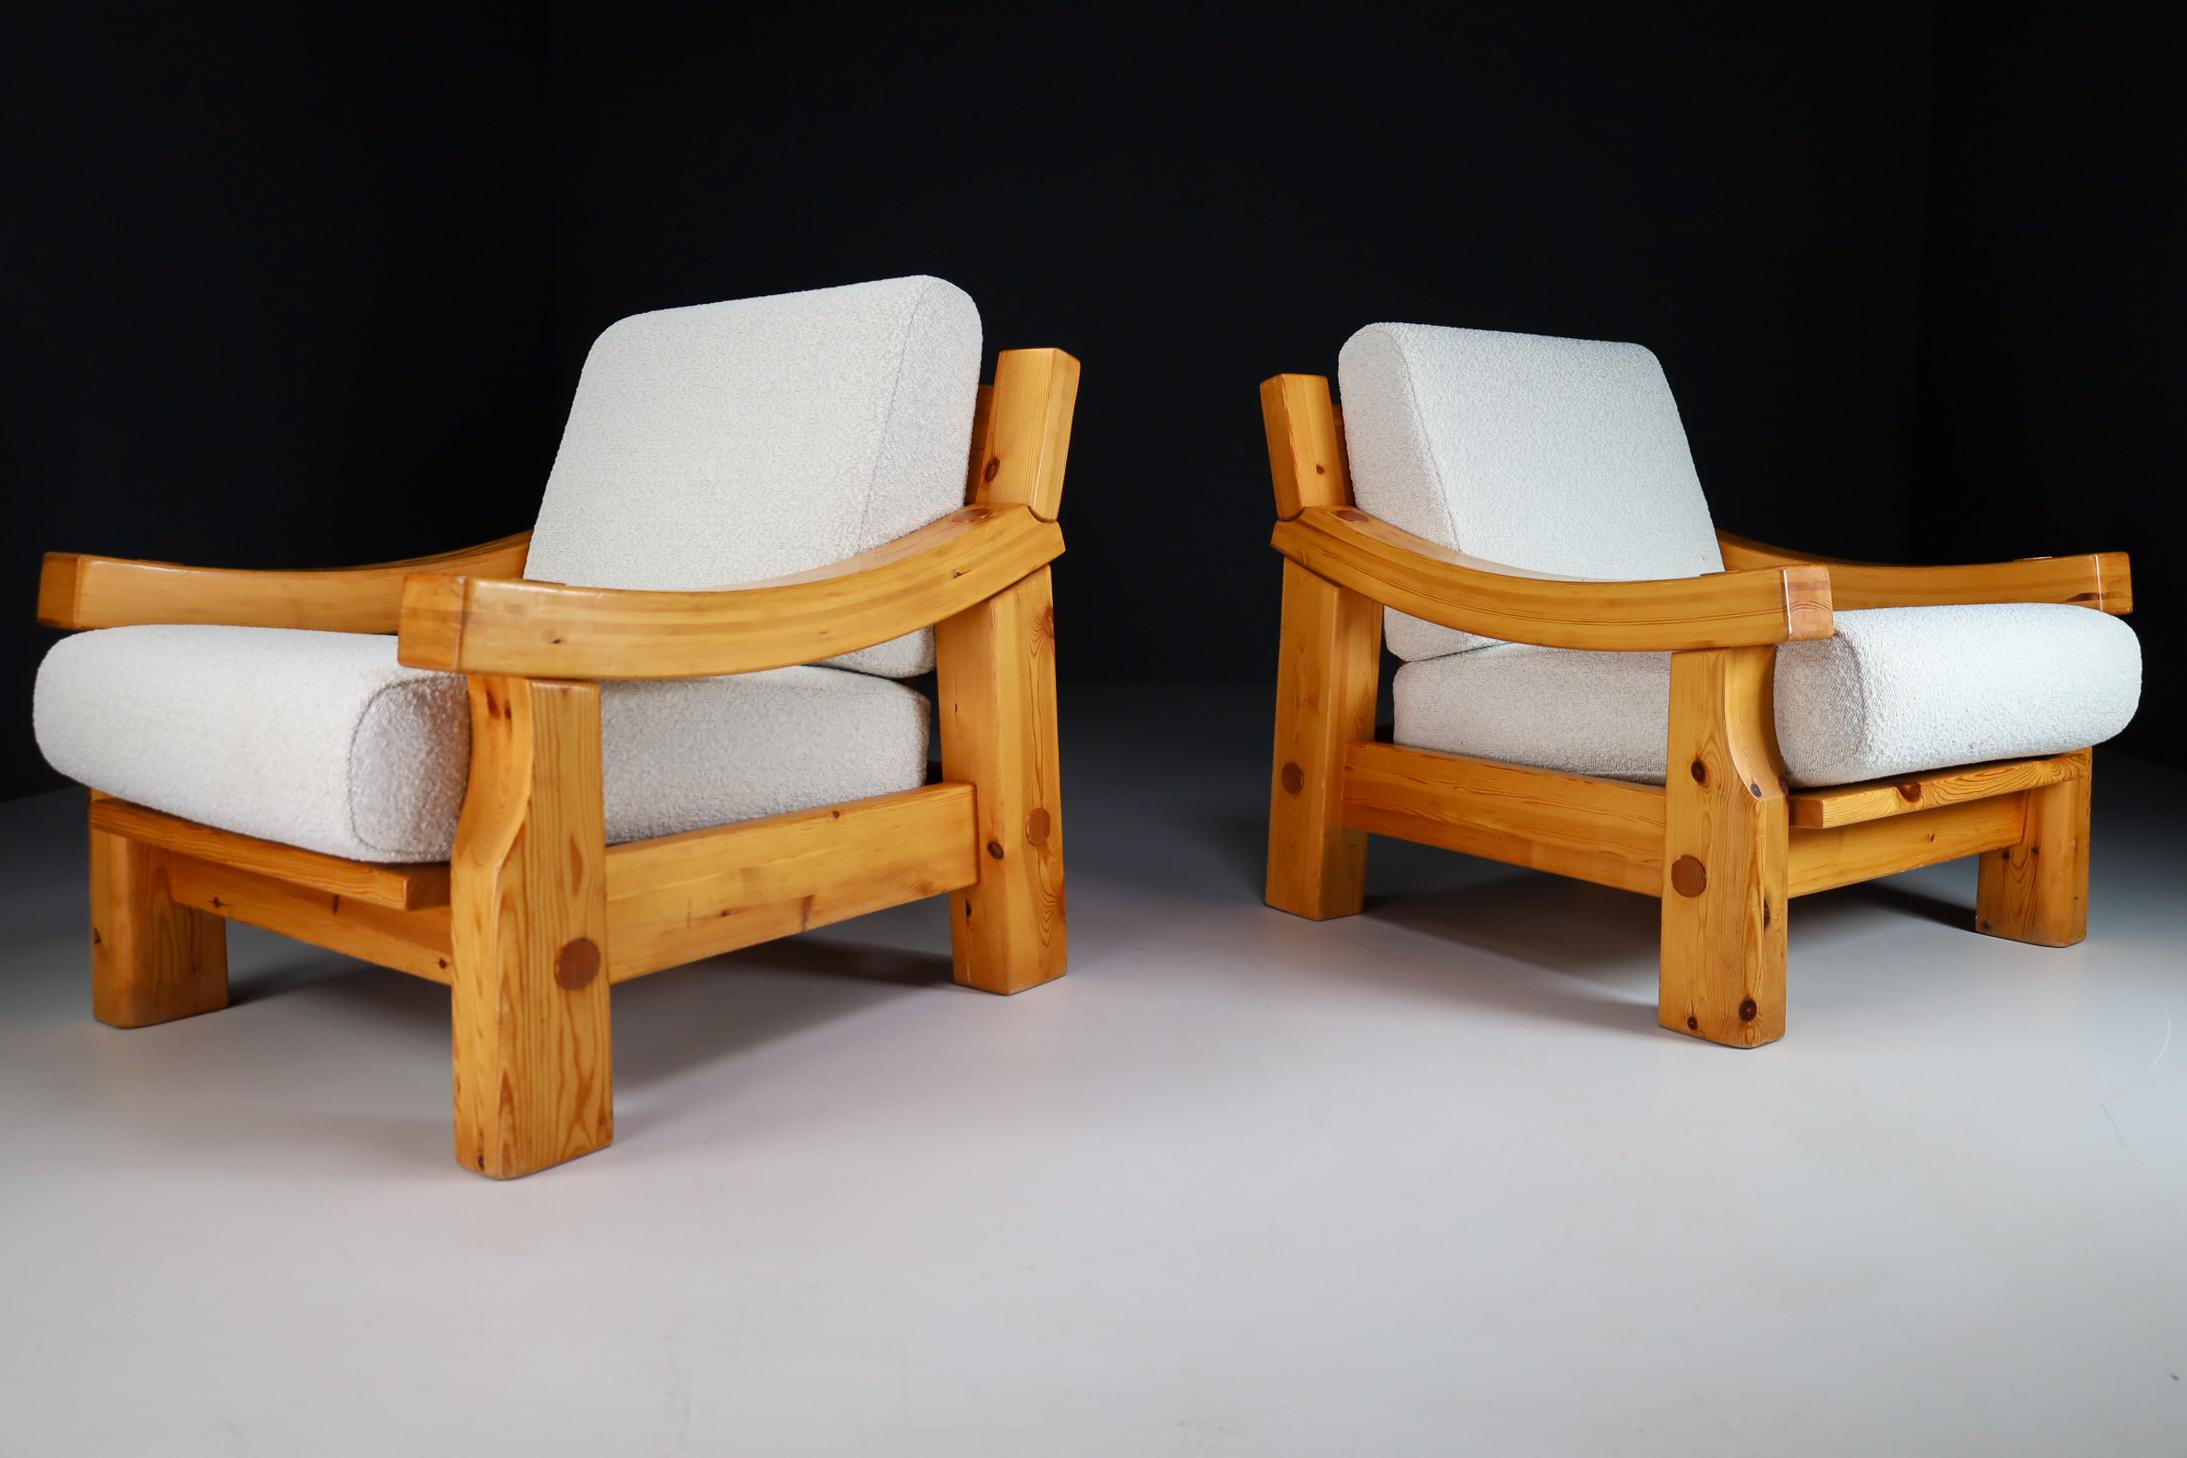 Pair of lounge chairs with sturdy frames in solid French pine Re-upholstered Bouclé wool fabric, France, 1970s. The grain of the wood is nicely visible, especially on the sturdy curved armrests. Thick Bouclé cushions provides seating comfort.